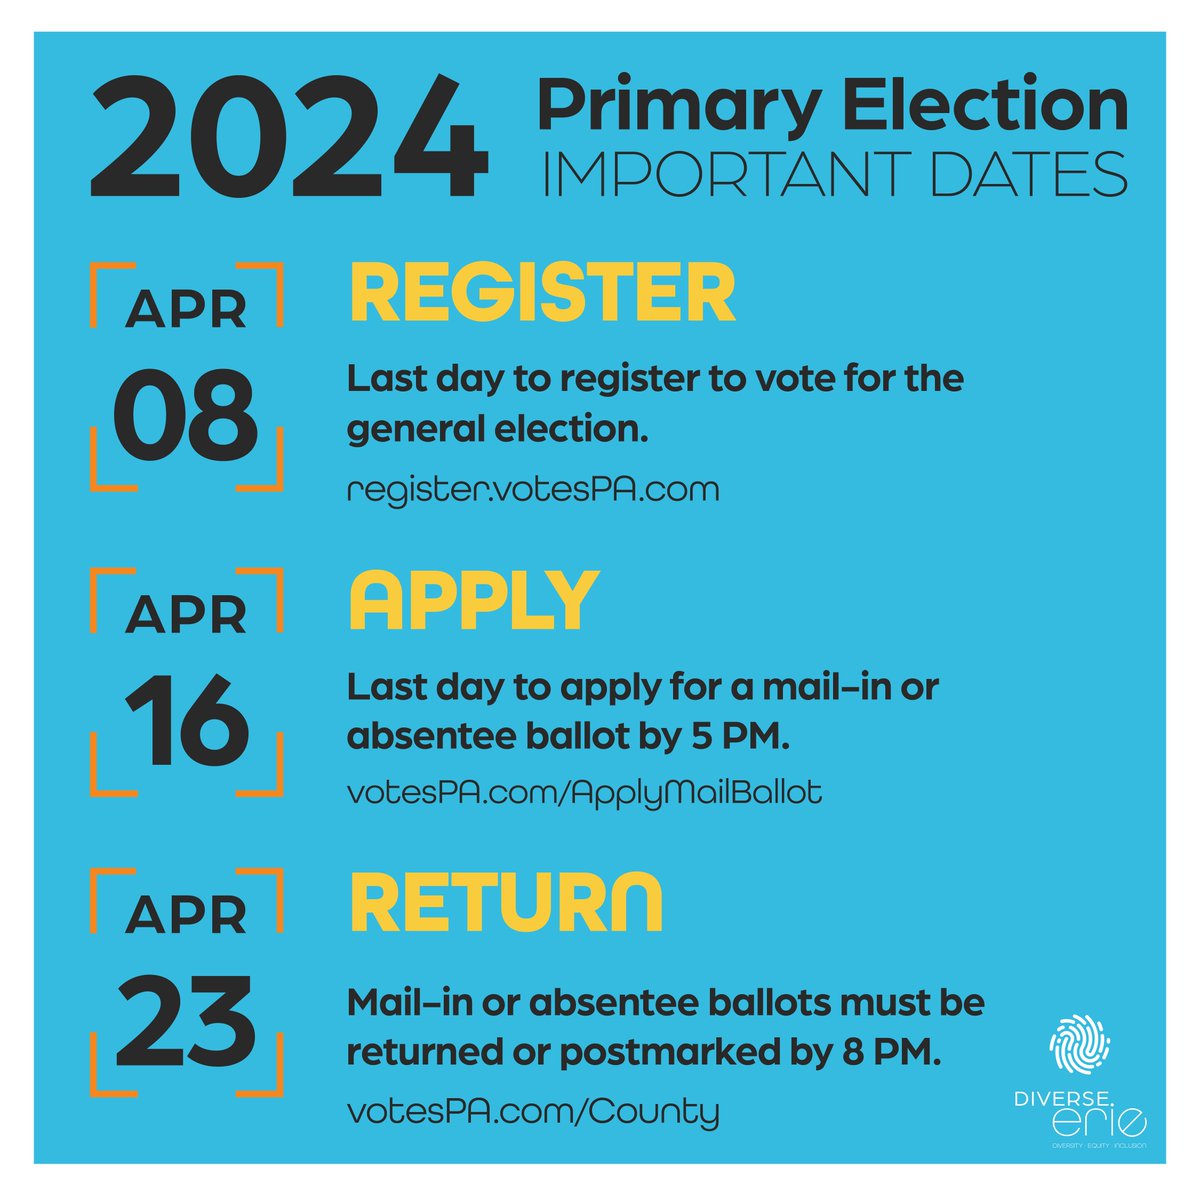 The last day to apply for a mail-in or absentee ballot is April 16th by 5PM! Don't forget! Ballots must be received by your county election office before 8:00pm on April 23rd to be counted. pavoterservices.pa.gov/OnlineAbsentee…